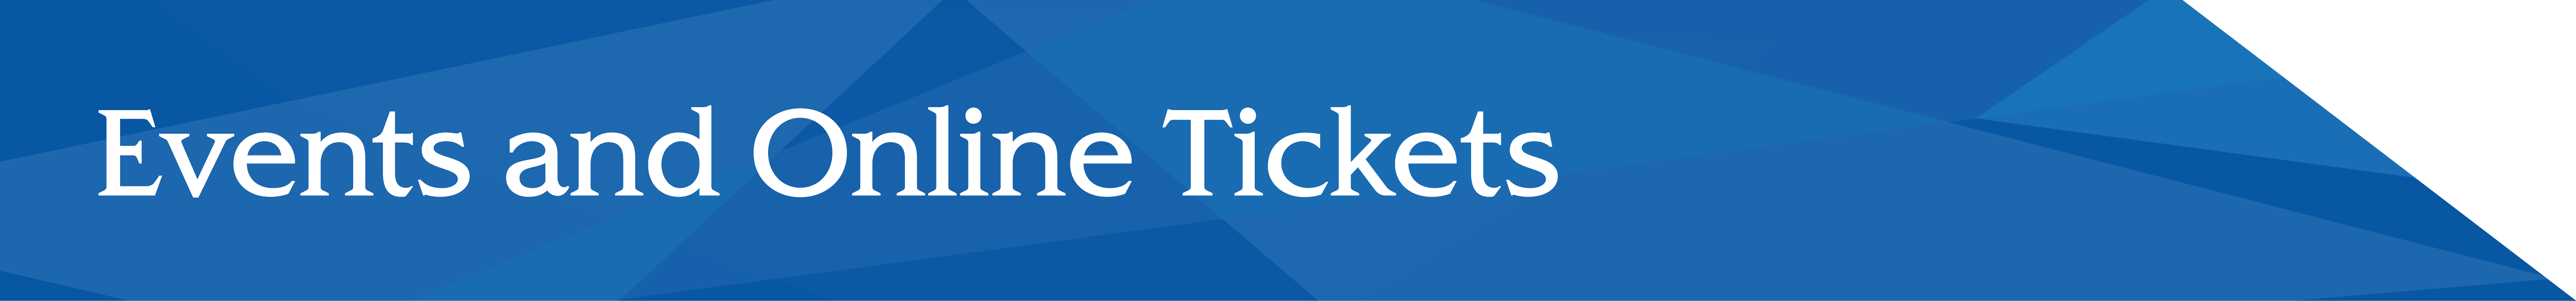 Events and Online Tickets